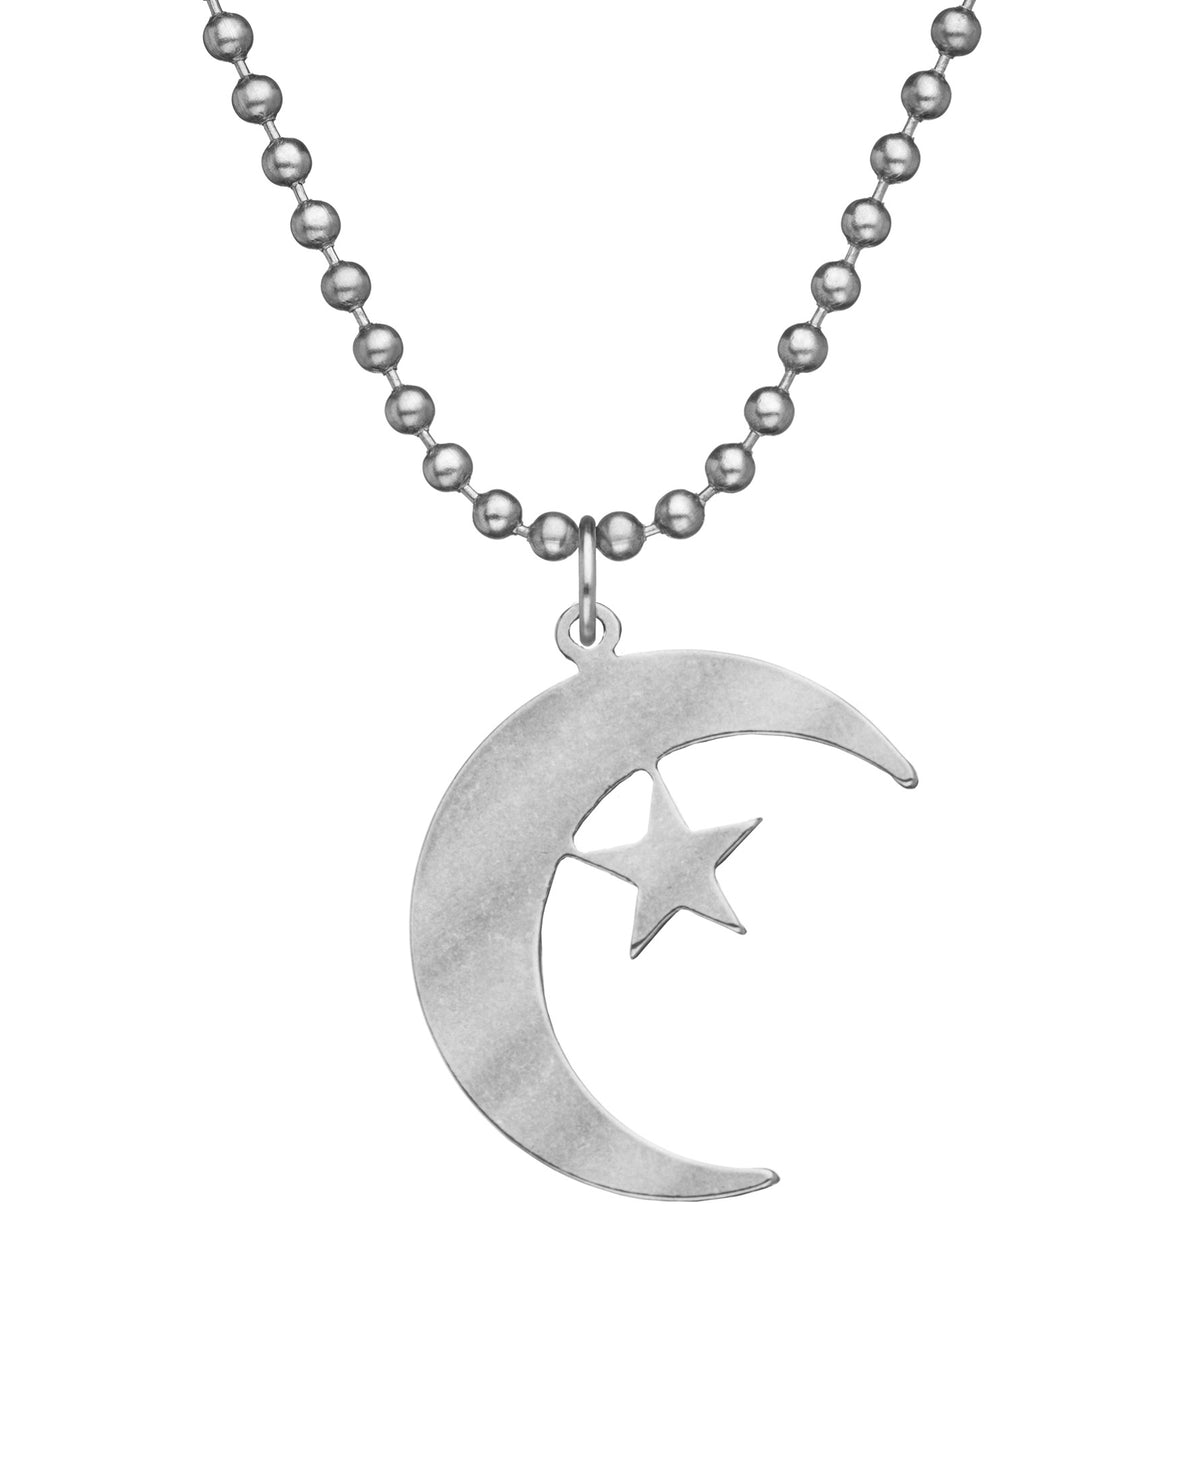 Genuine U.S. Military Issue Crescent & Star Necklace with Dog Tag Chain